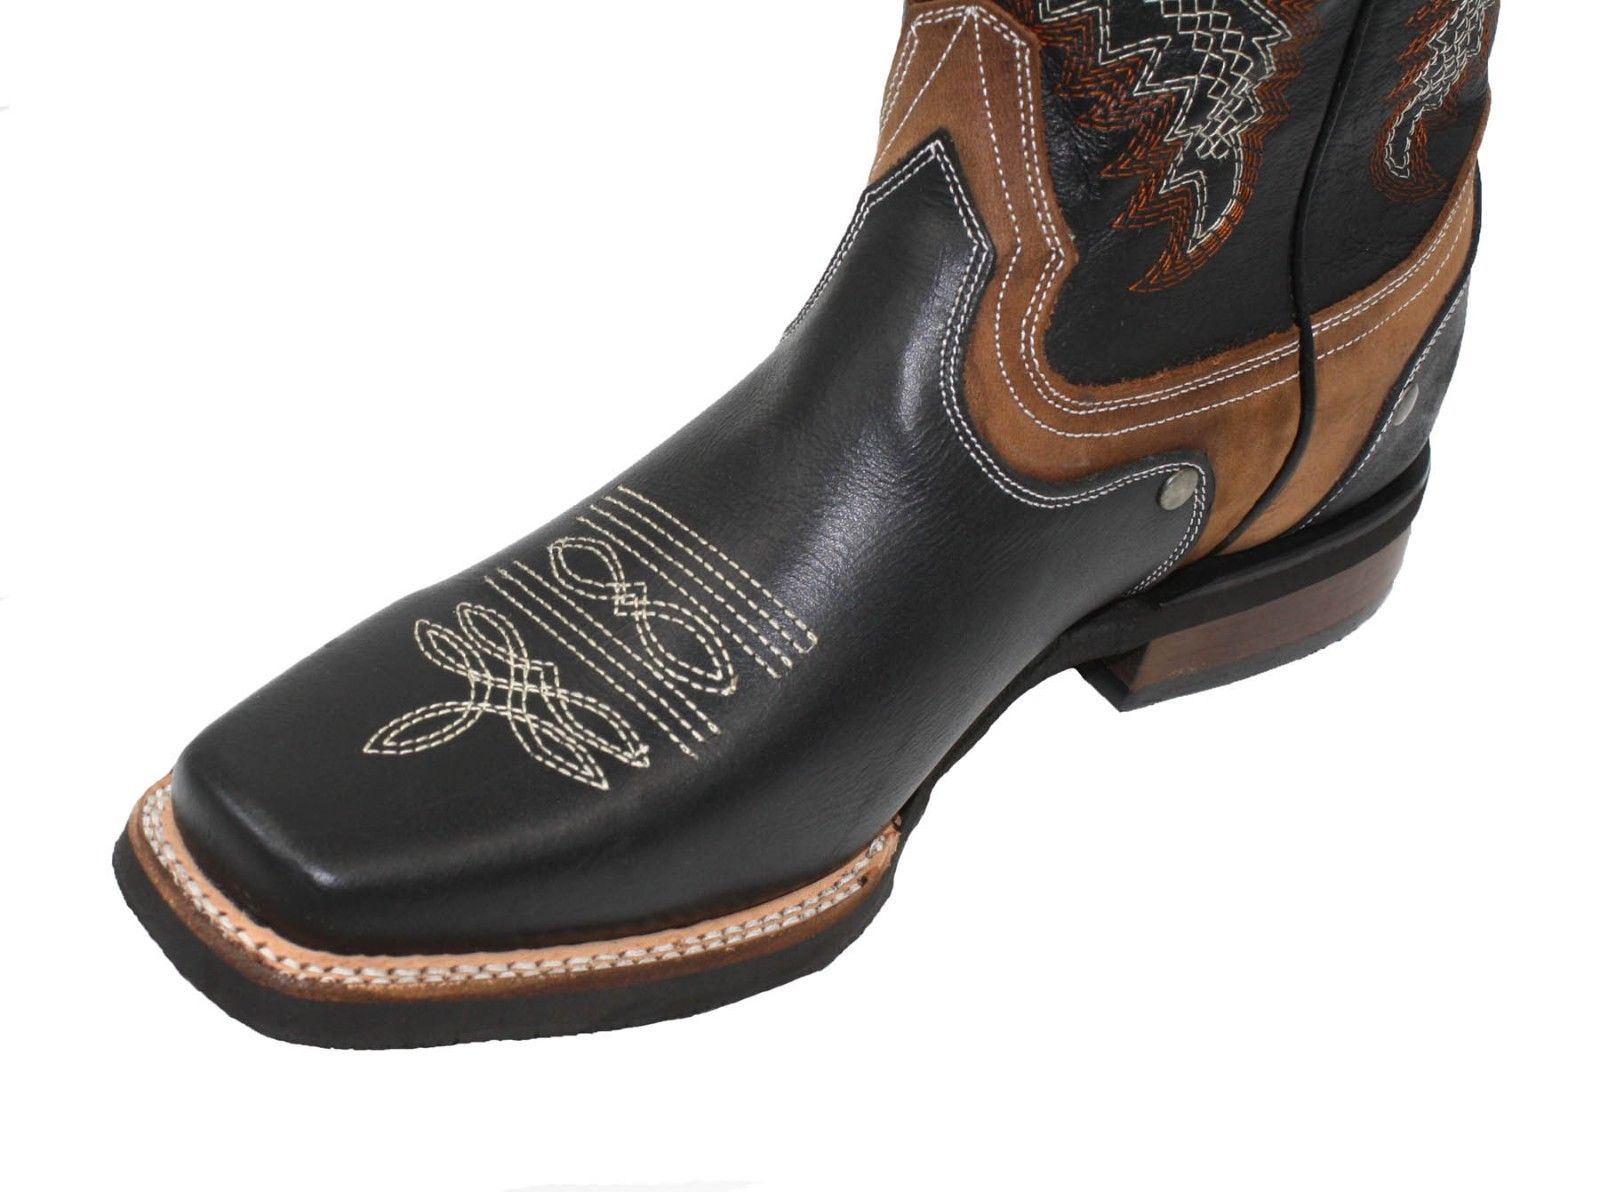 MEN'S RODEO COWBOY BOOTS GENUINE LEATHER WESTERN SQUARE TOE BOTAS-601